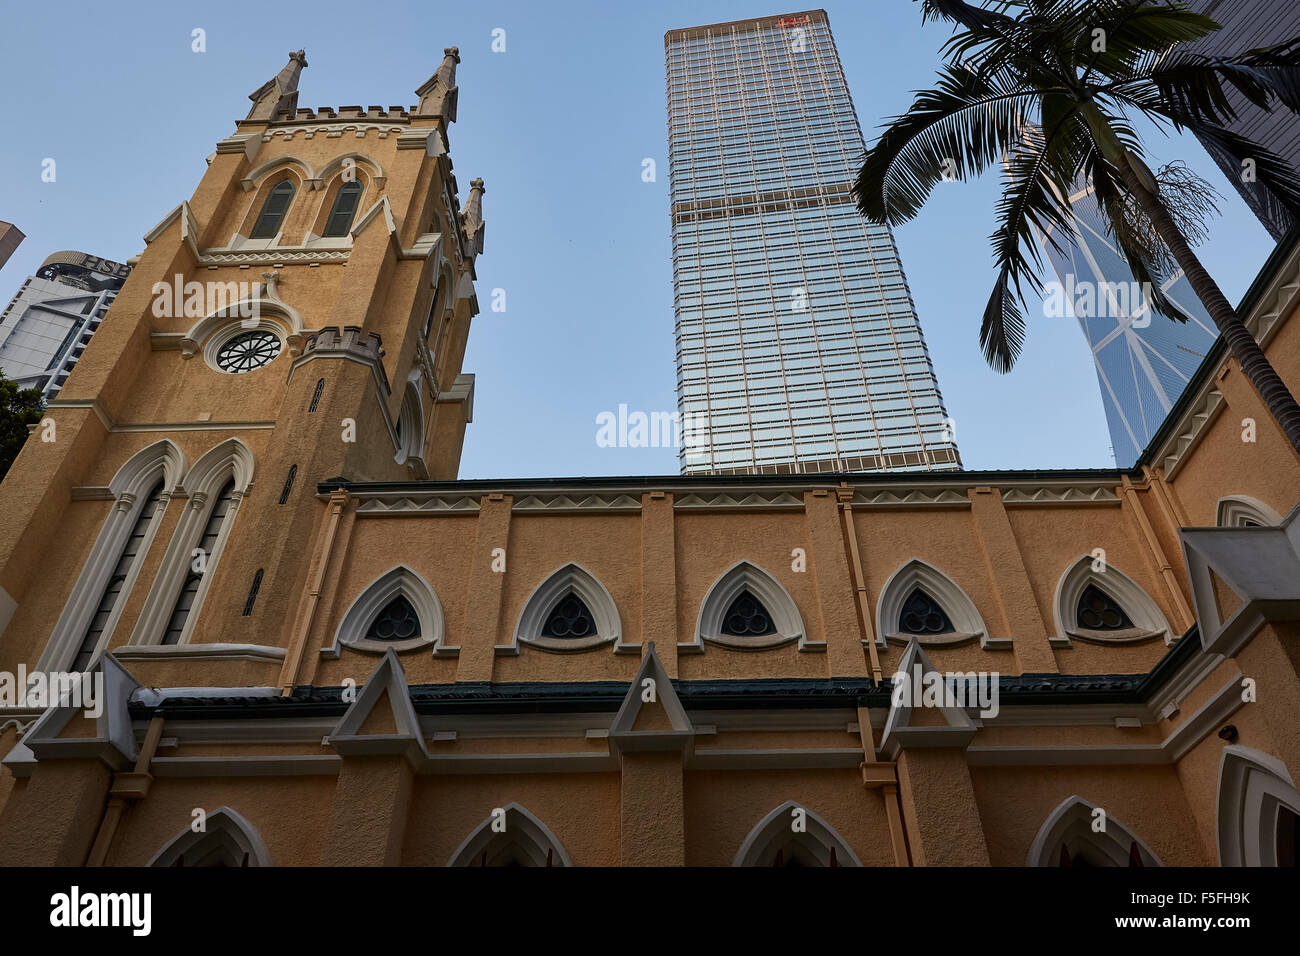 St John's Cathedral With The Financial District Skyline Behind, Hong Kong. 8 October 2015. Stock Photo